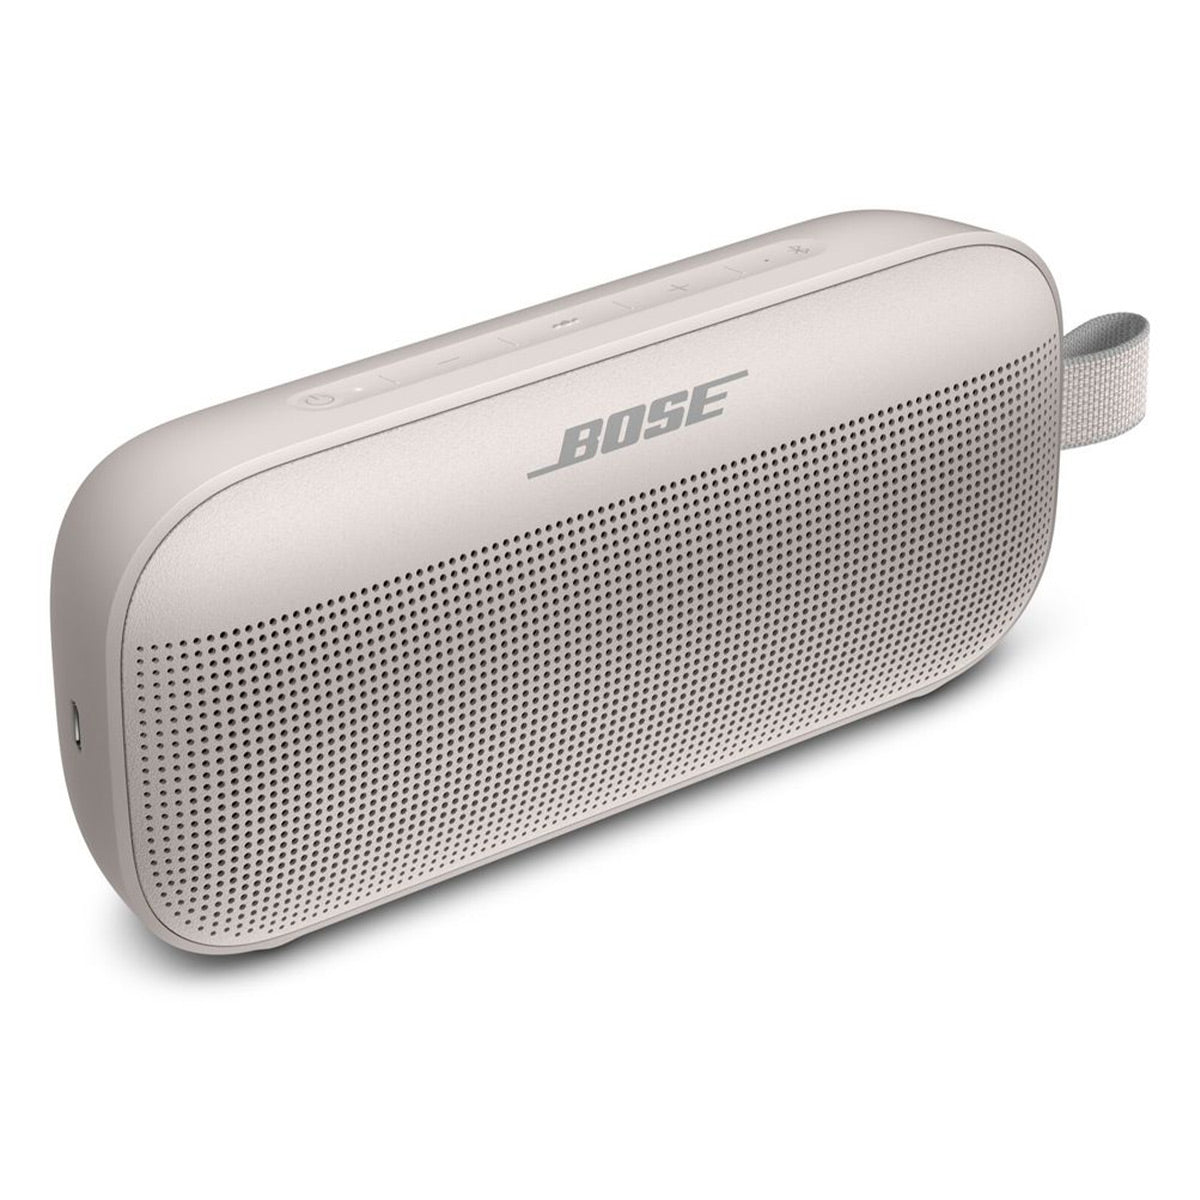 Bose QuietComfort Earbuds II True Bluetooth Personalized Wireless Bose Smoke) | Wide with World (White and Flex (Soapstone) Stereo Speaker Portable Noise Cancellation SoundLink